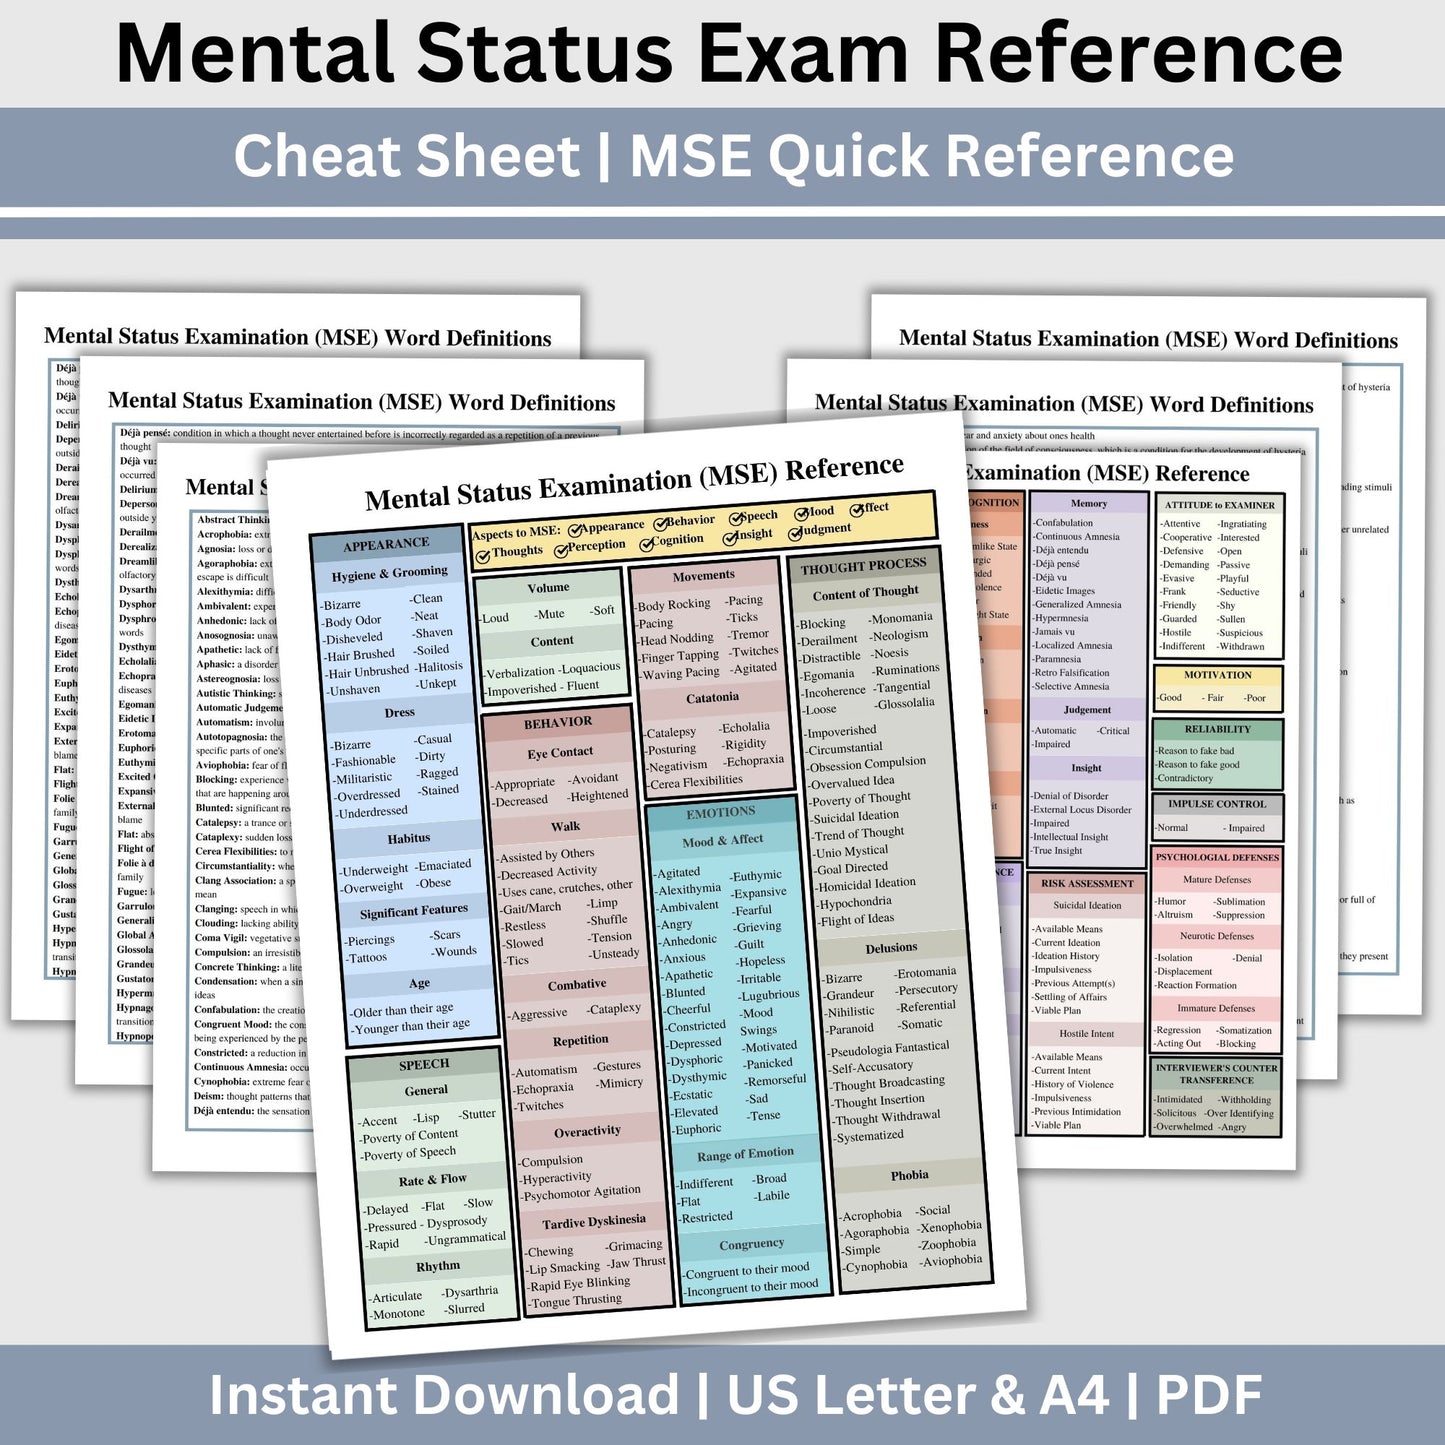 MSE reference sheet provides a perfect cheat sheet for psychologists, counselors, therapist office, social workers, and other mental health professionals. Mental status exam for social workers, school counselors.